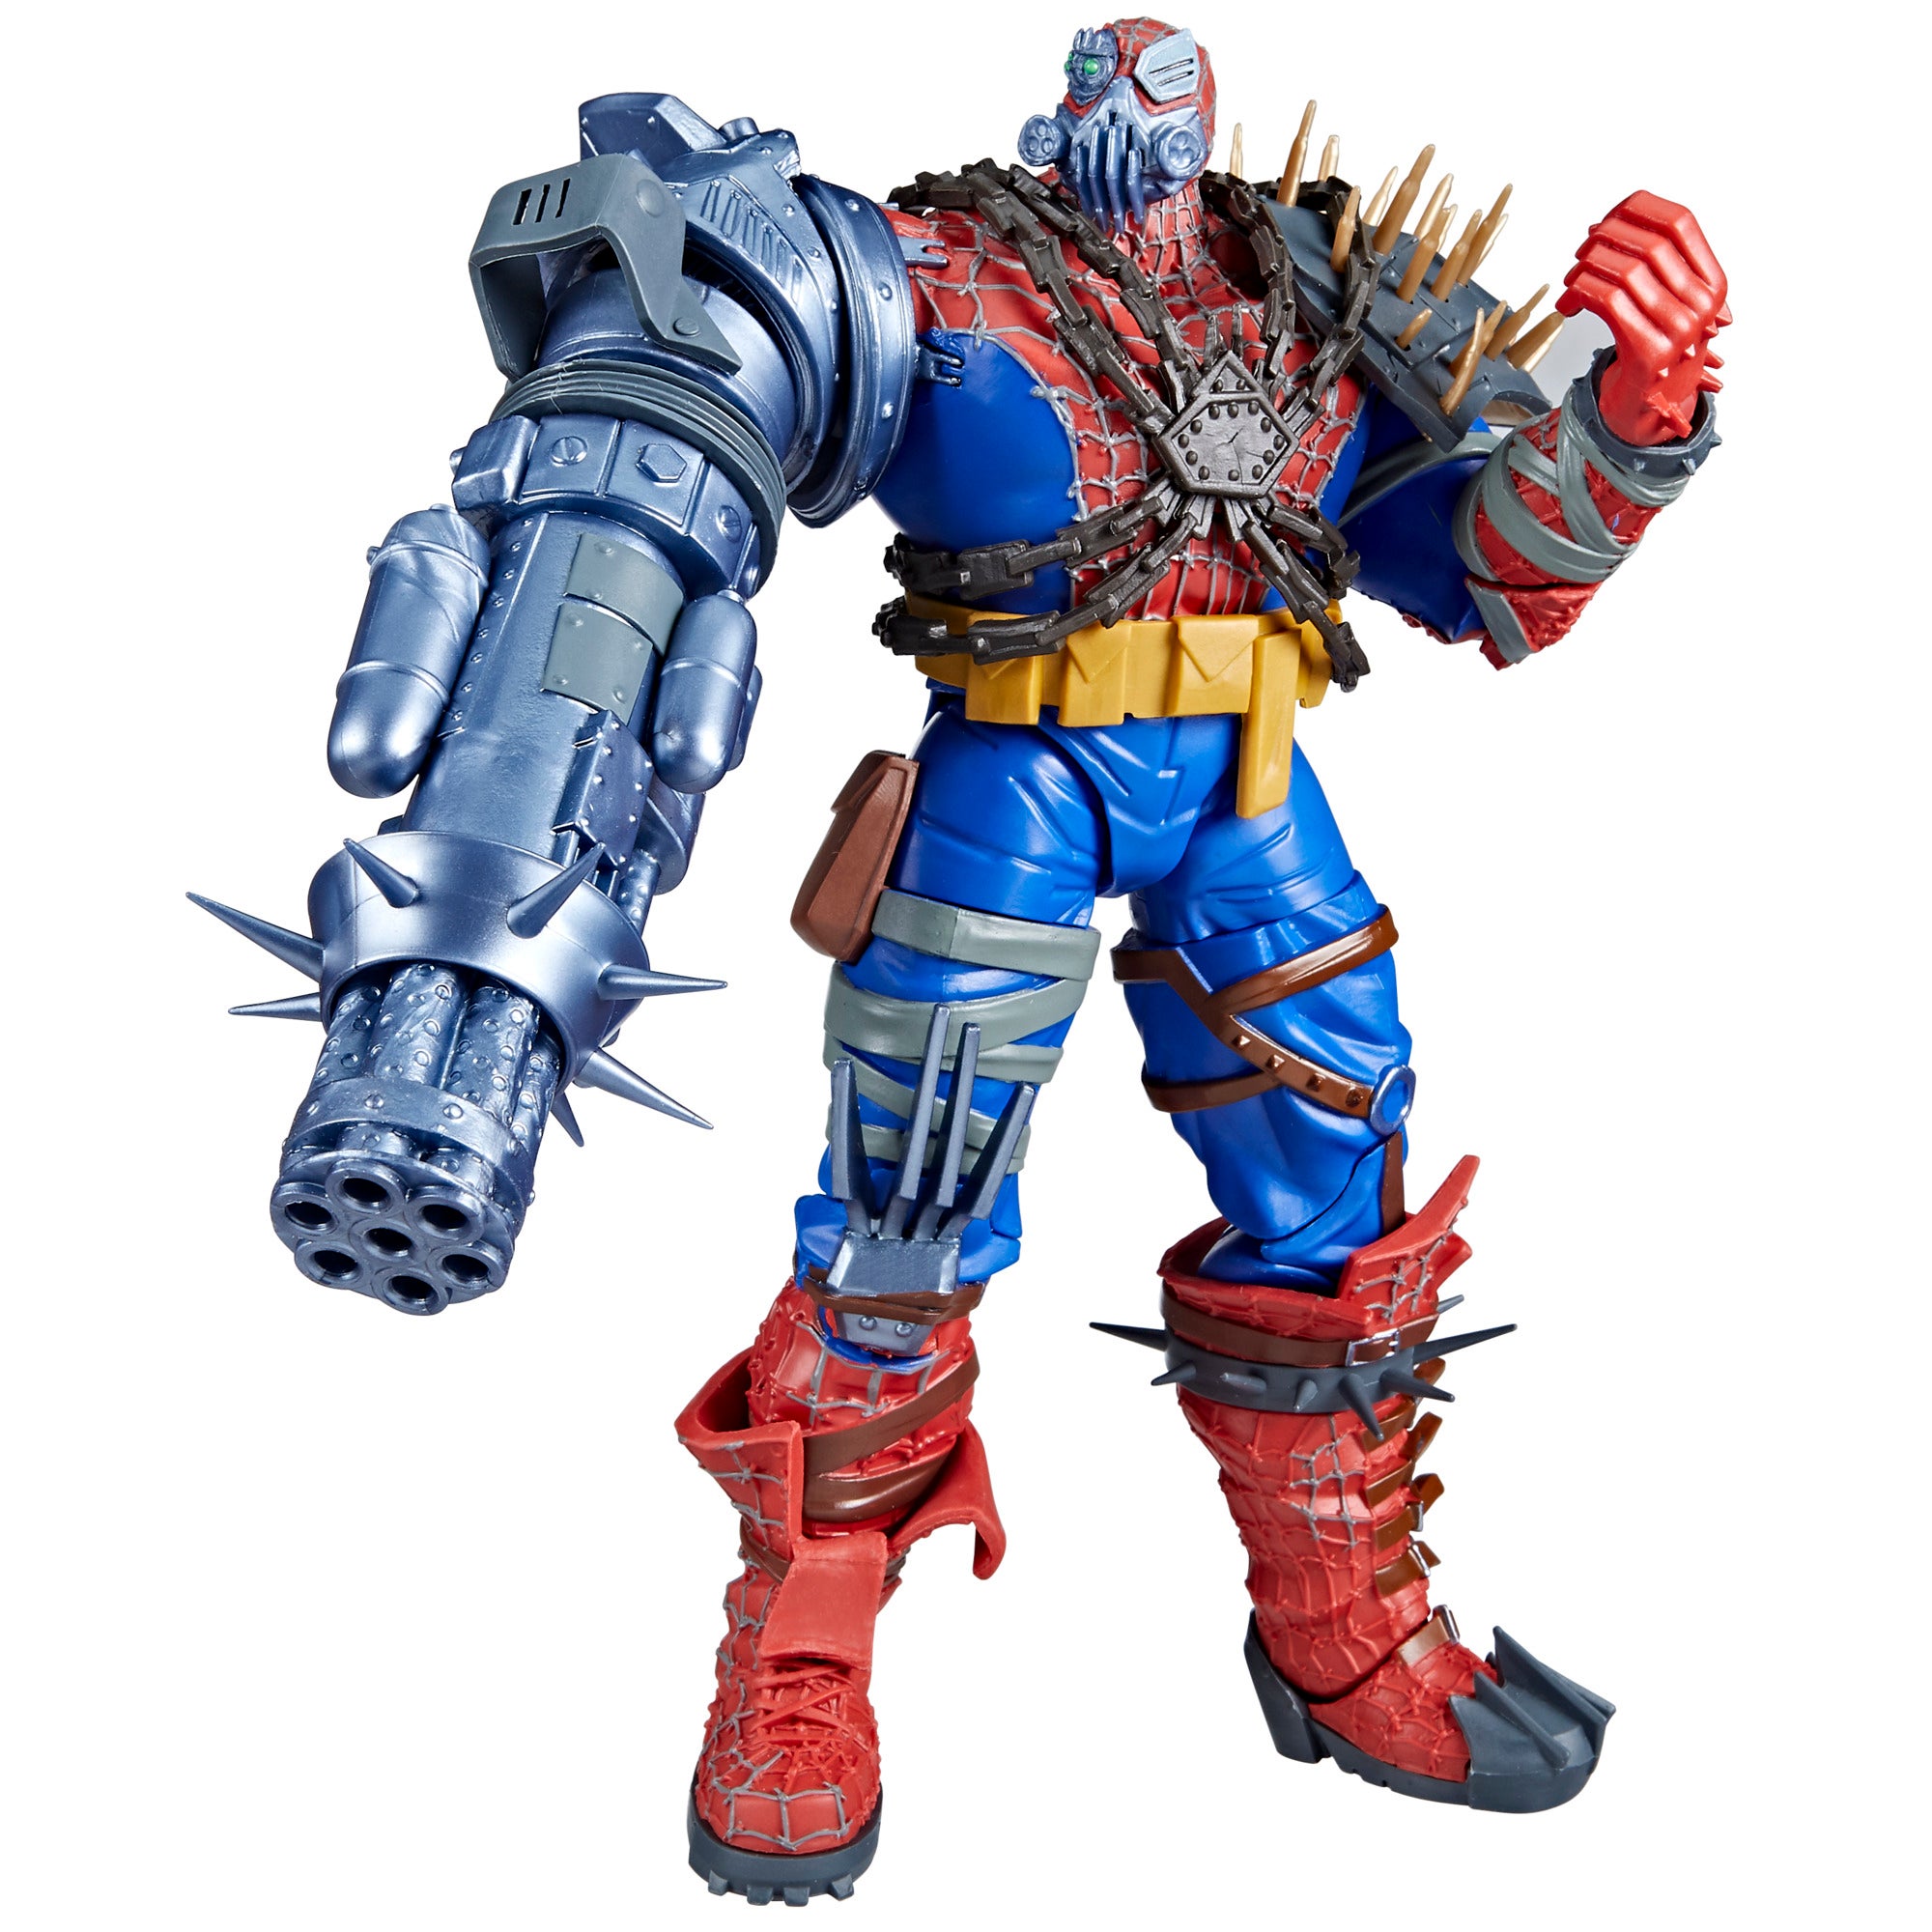 Official 'Across the Spider-Verse' Marvel Legends wave photos revealed